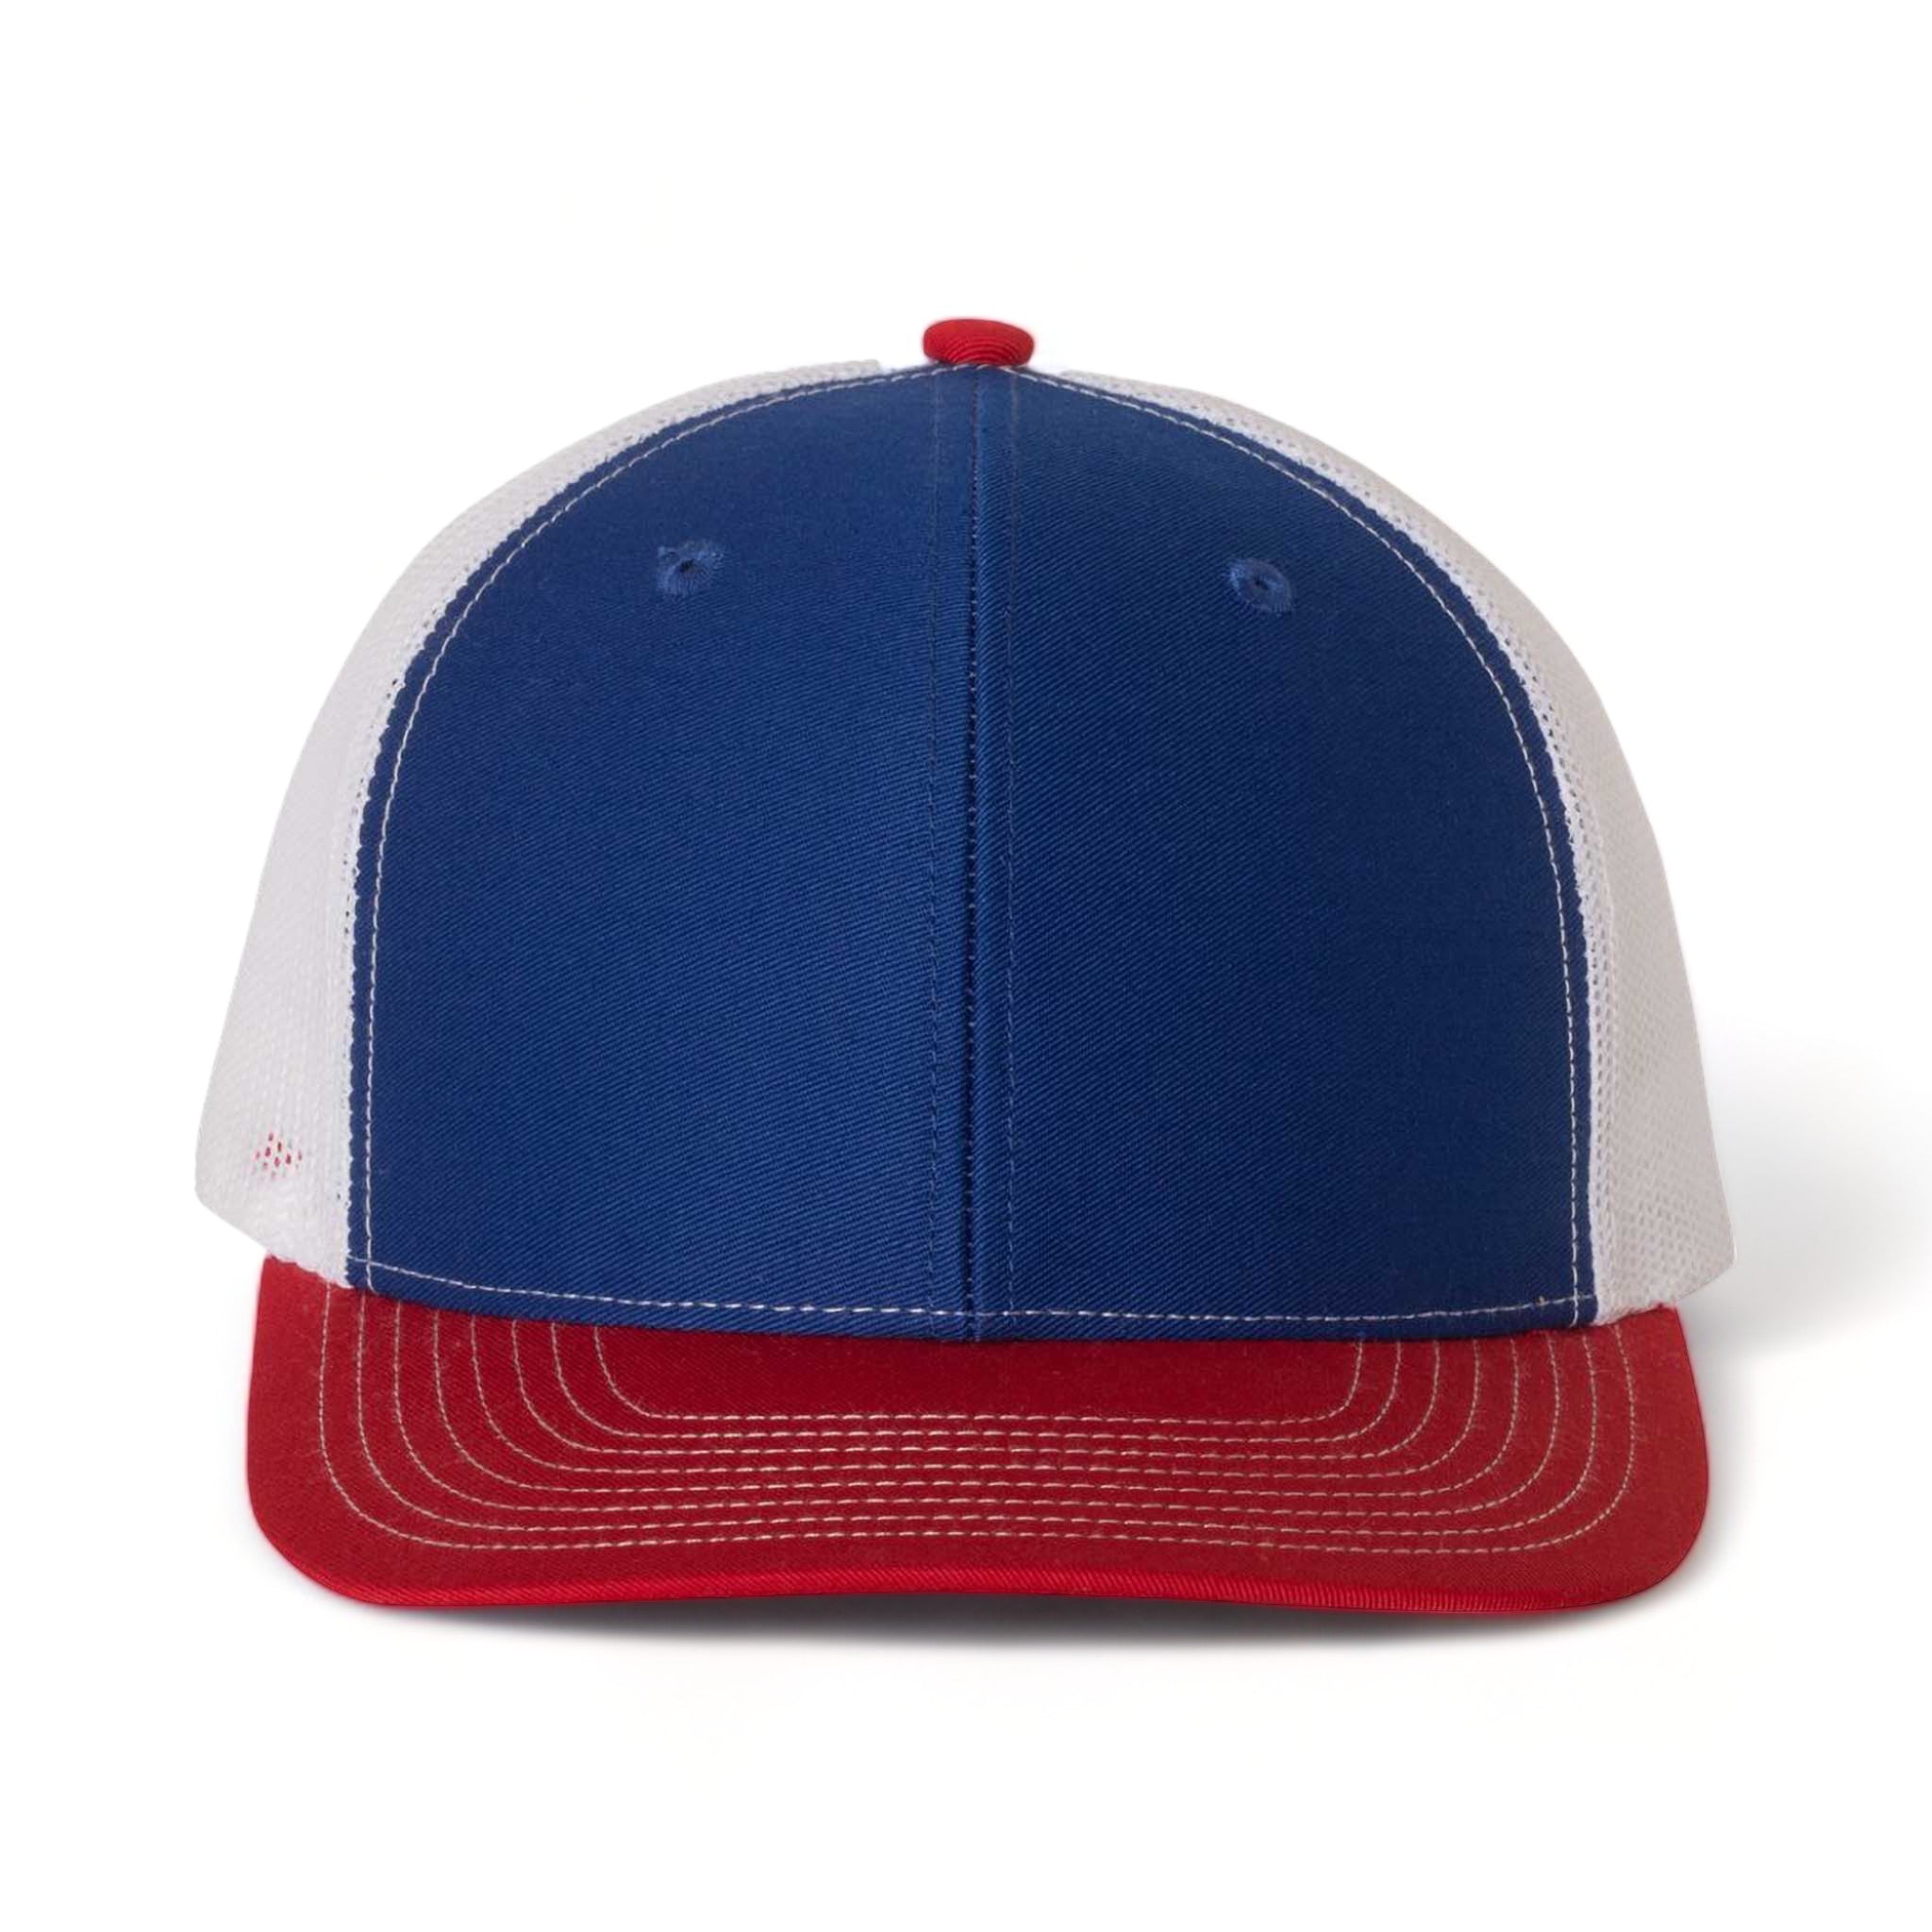 Front view of Richardson 112 custom hat in royal, white and red